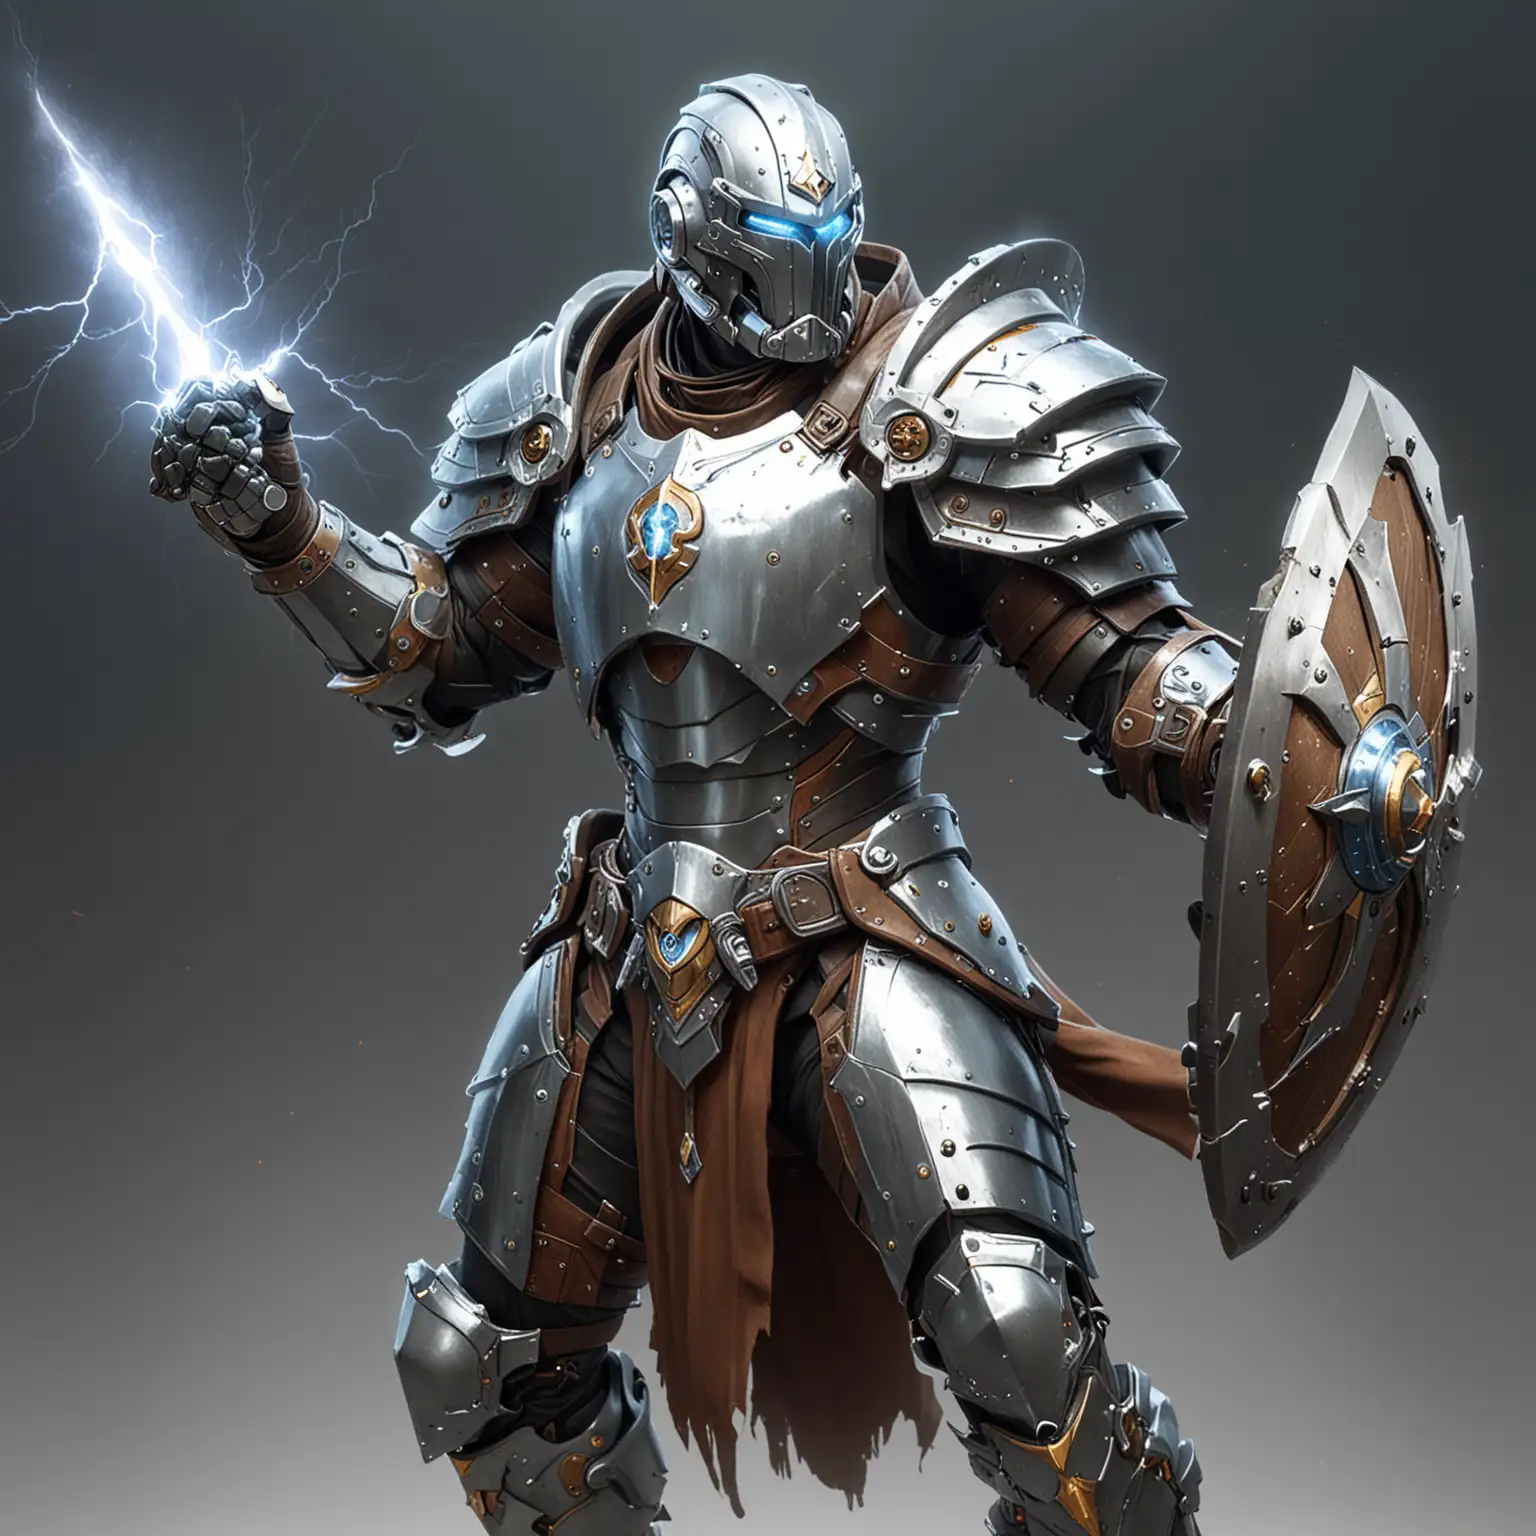 A short warforged artificer. he is wearing platinum colored plate armor and wielding a medium sized shield. There is lightning shooting from both of his hands.